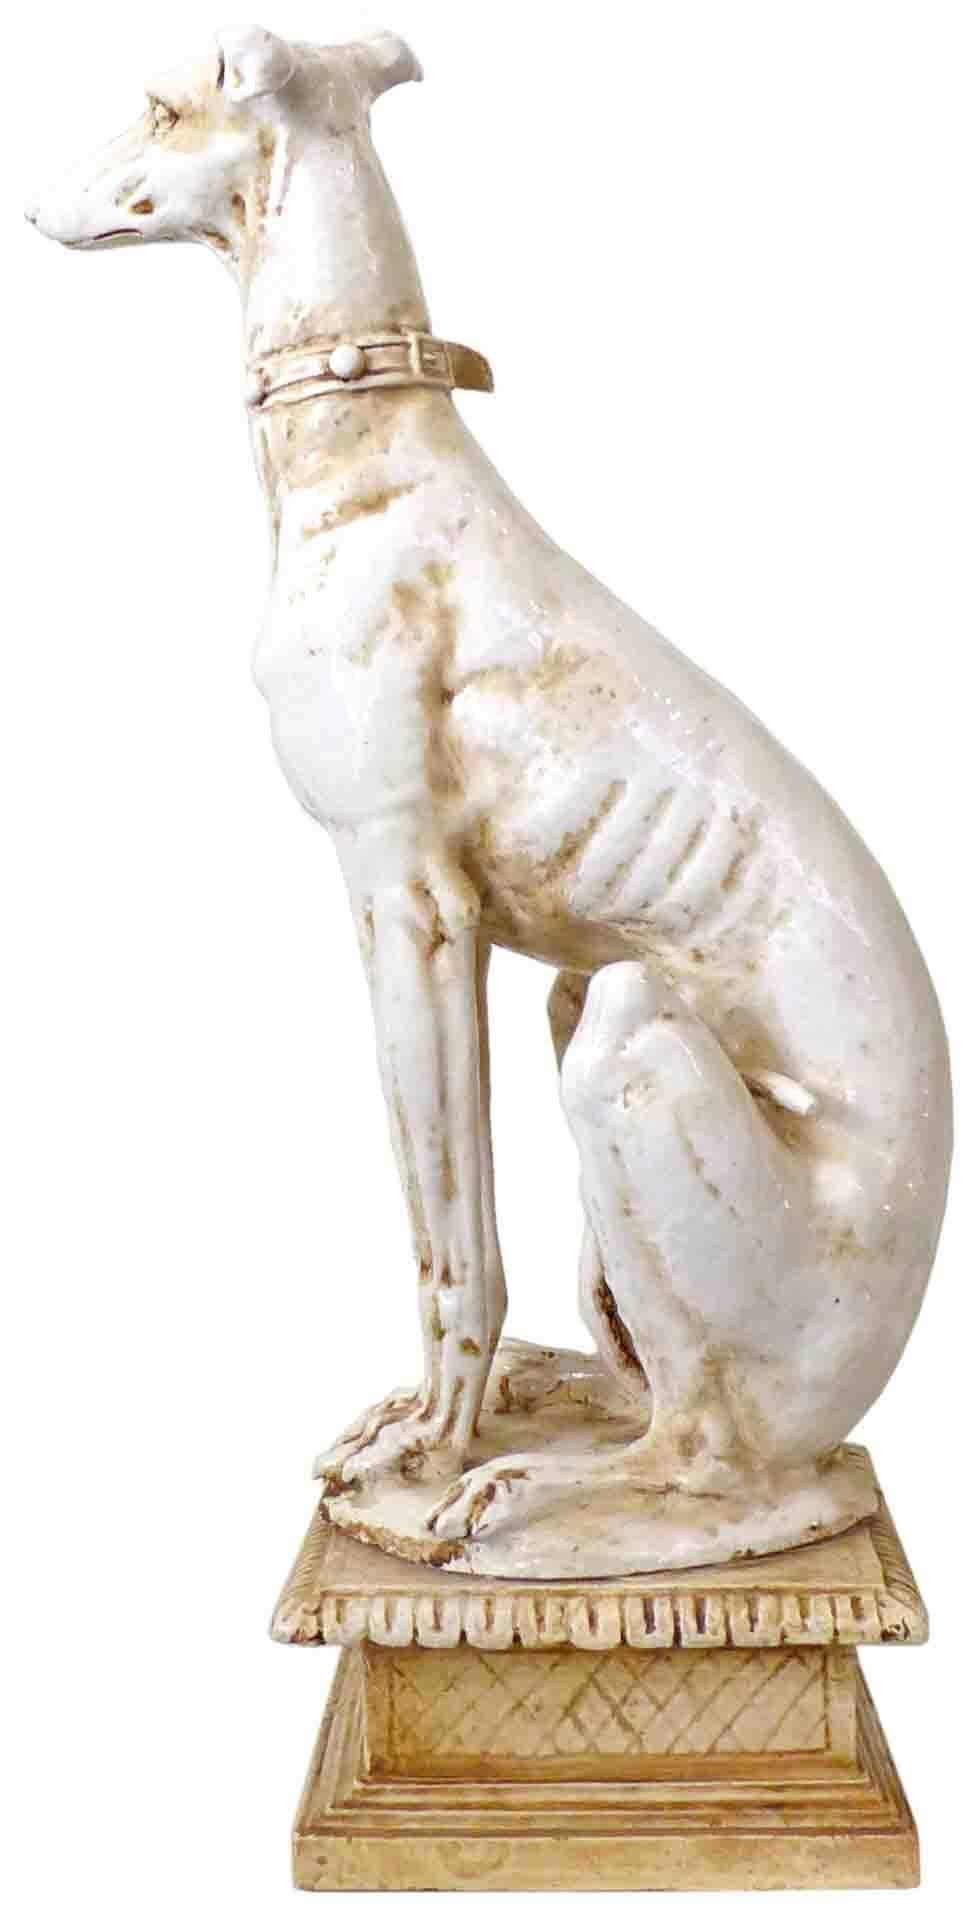 An outstanding pair of Italian, glazed terracotta, greyhound statues.  Perfectly pedestal-perched, realistic and life-size representations of these regal creatures, simultaneously austere, alert, and obedient.  Subtly-differing, near-mirror imaging